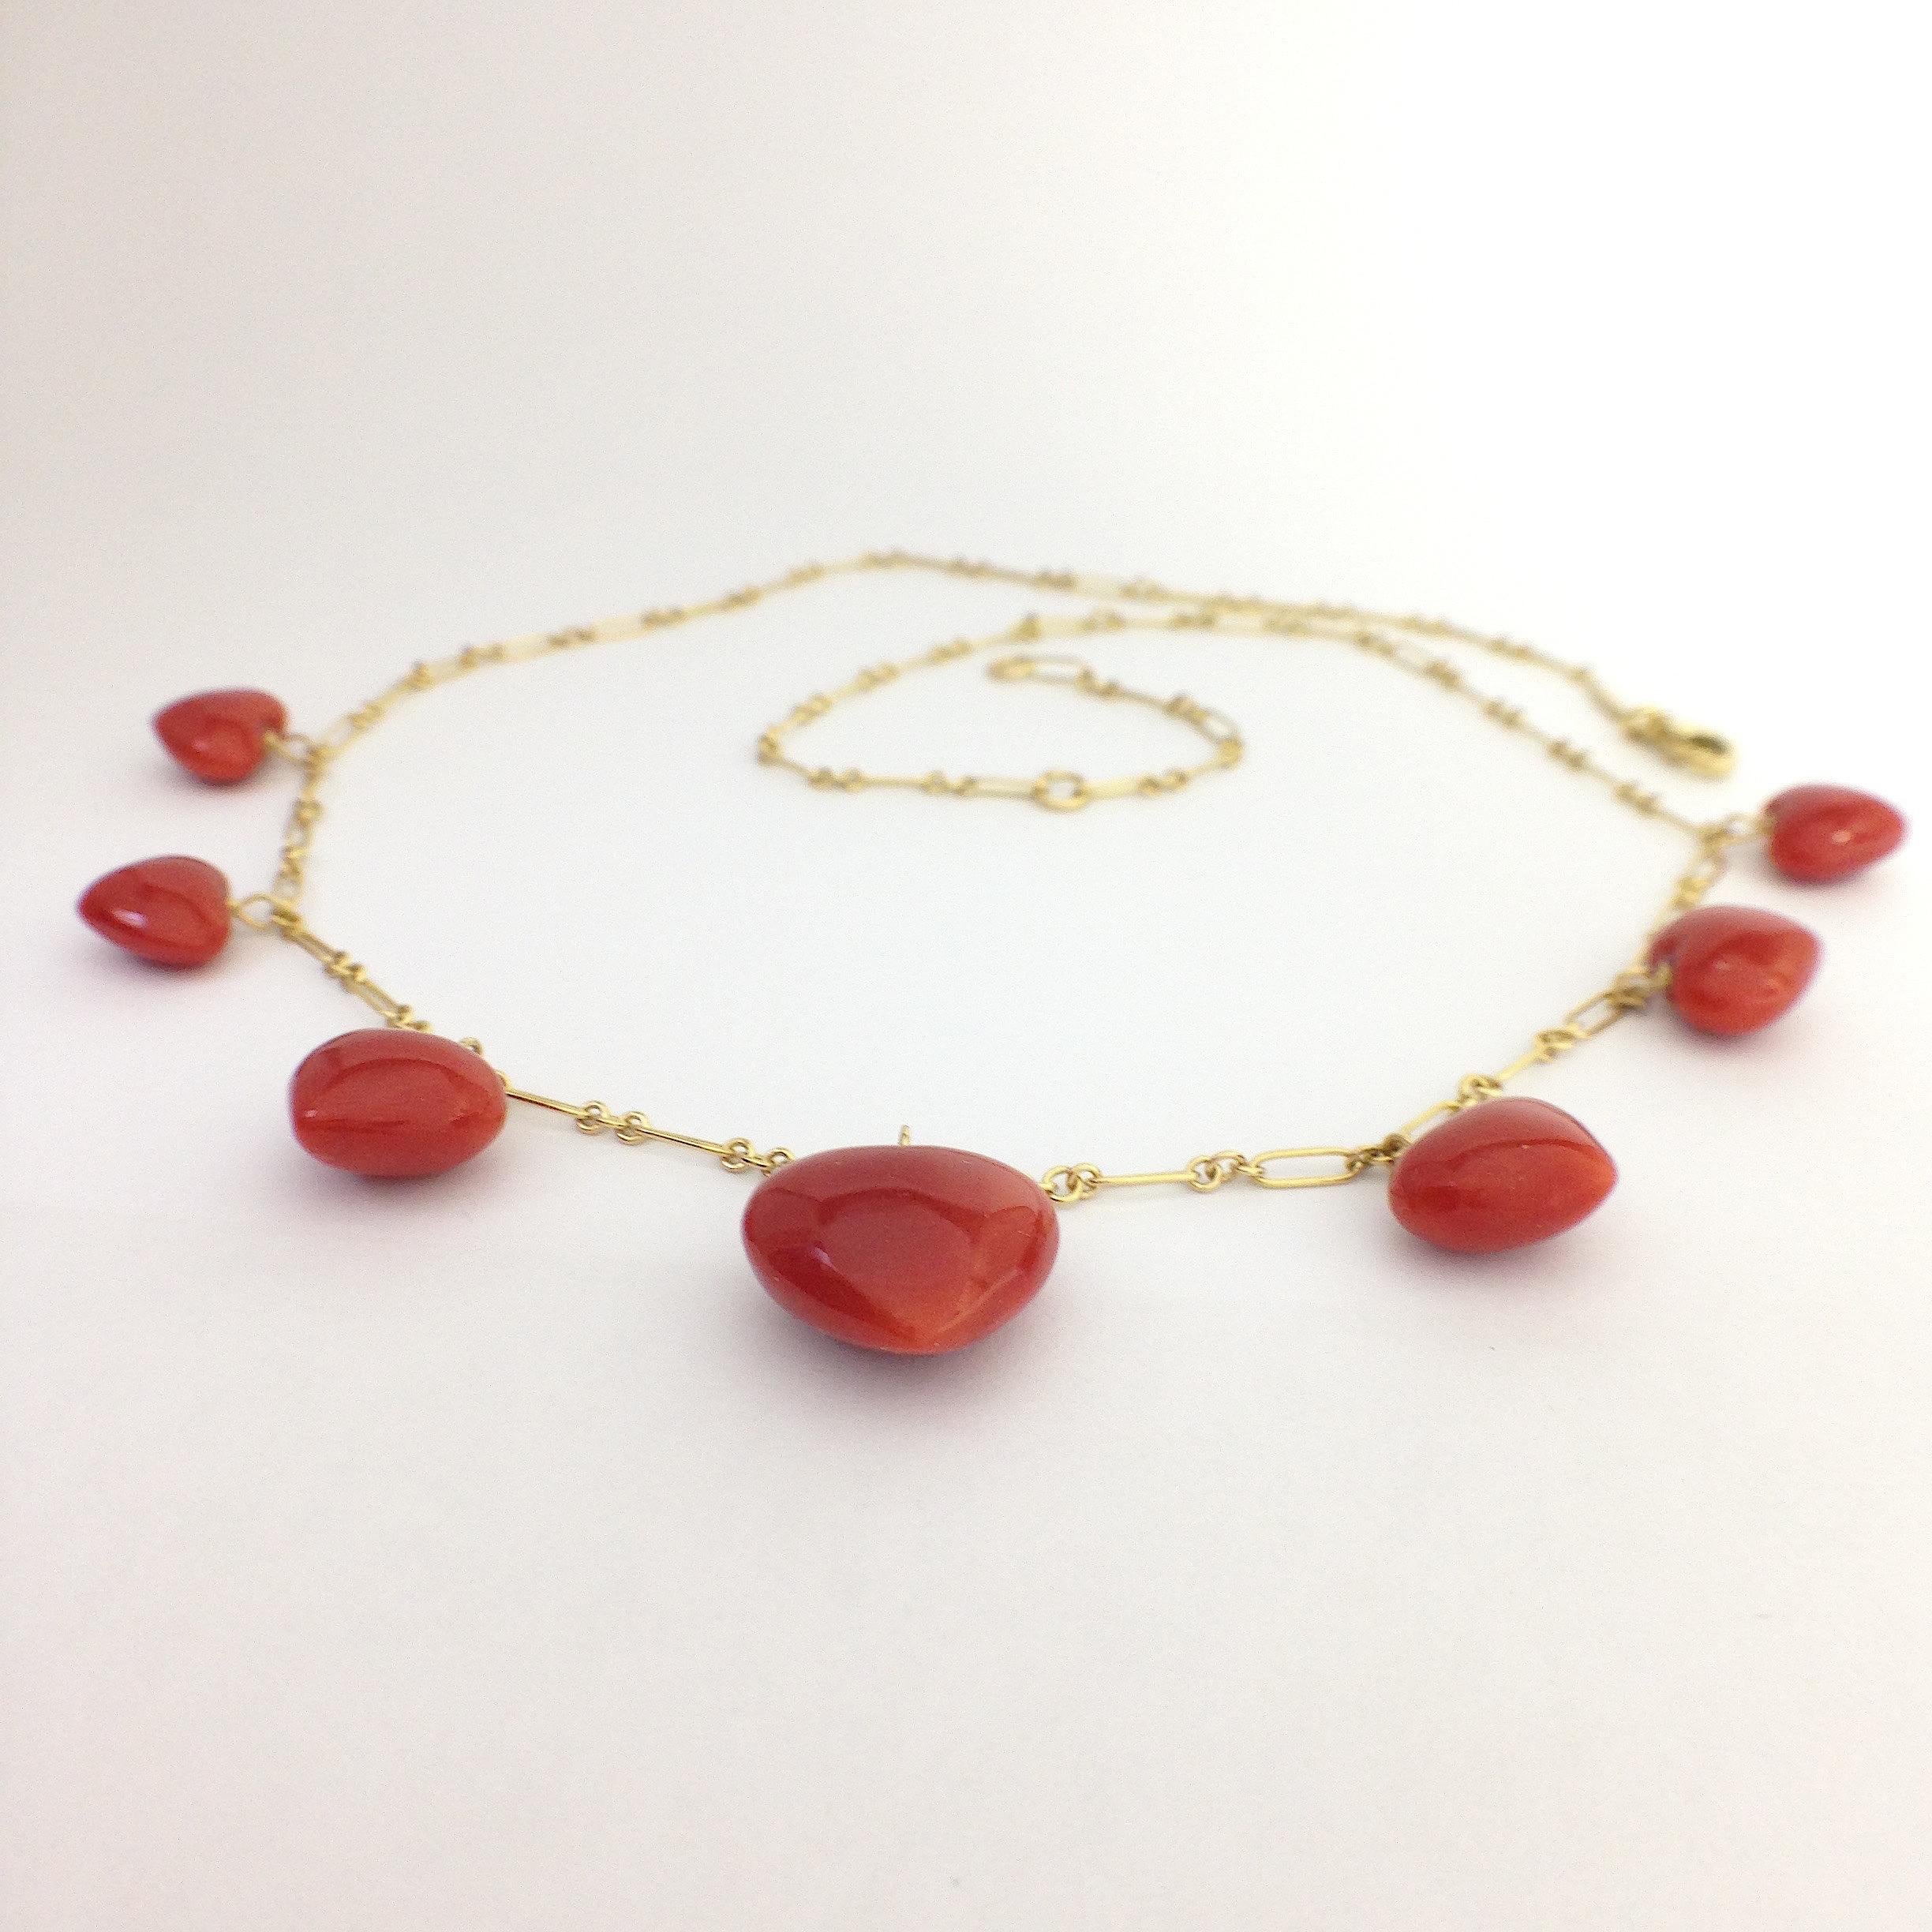 This is a necklace completely handmade in 18Kt gold.
It has 7 red coral hearts positioned from smaller to larger towards the center of the necklace.
It is 43 cm or 47 cm long because it has a ring at those two lengths.

We can make jewelry according